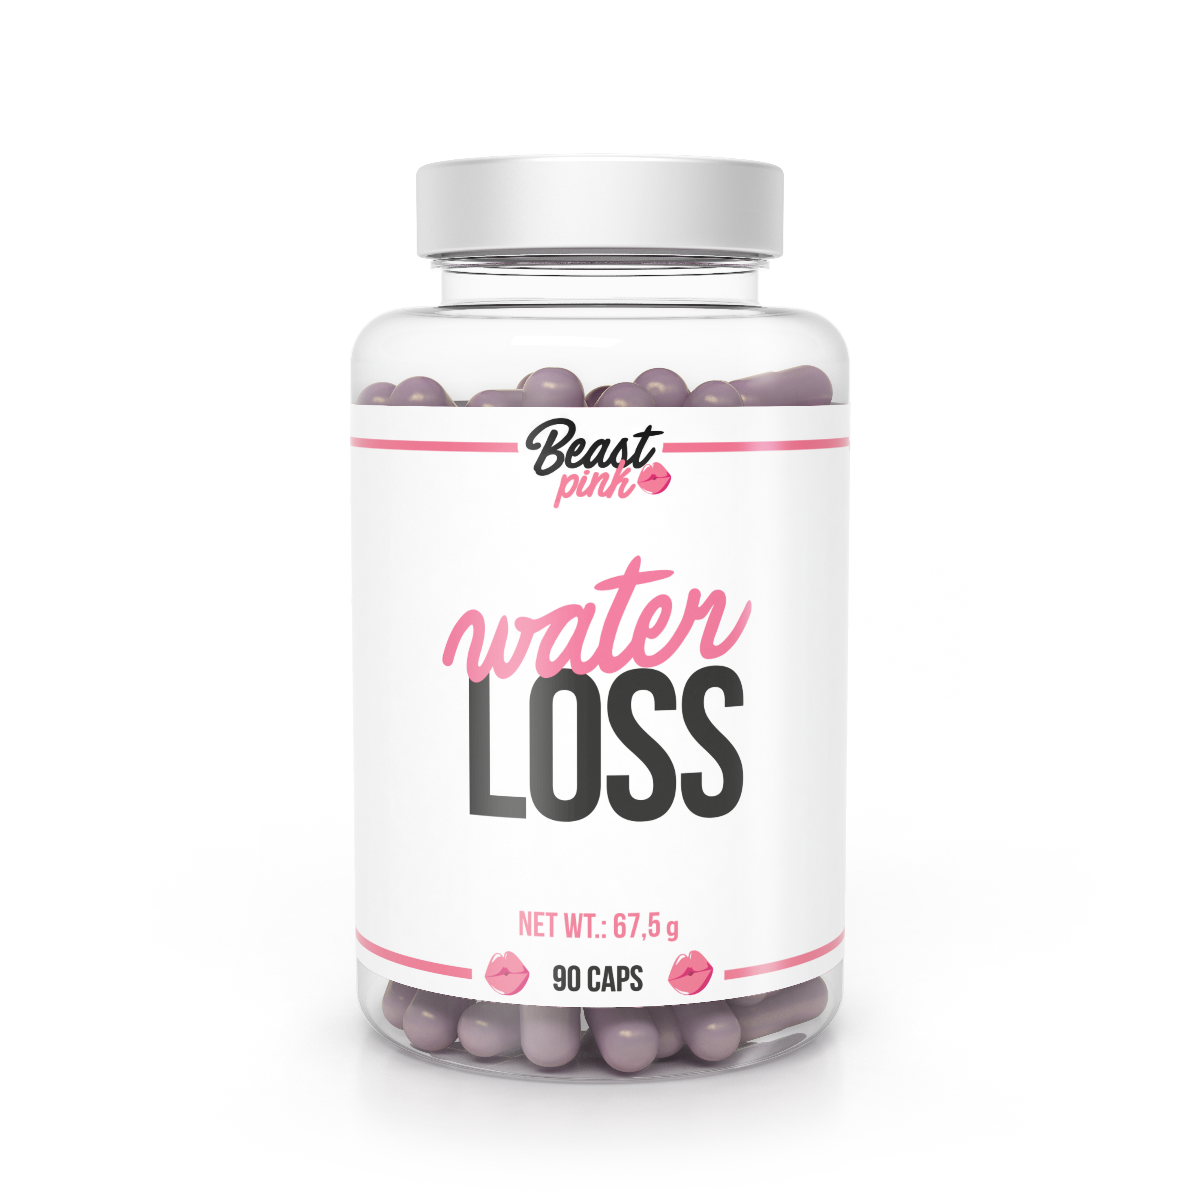 E-shop Water Loss - BeastPink, 90 cps